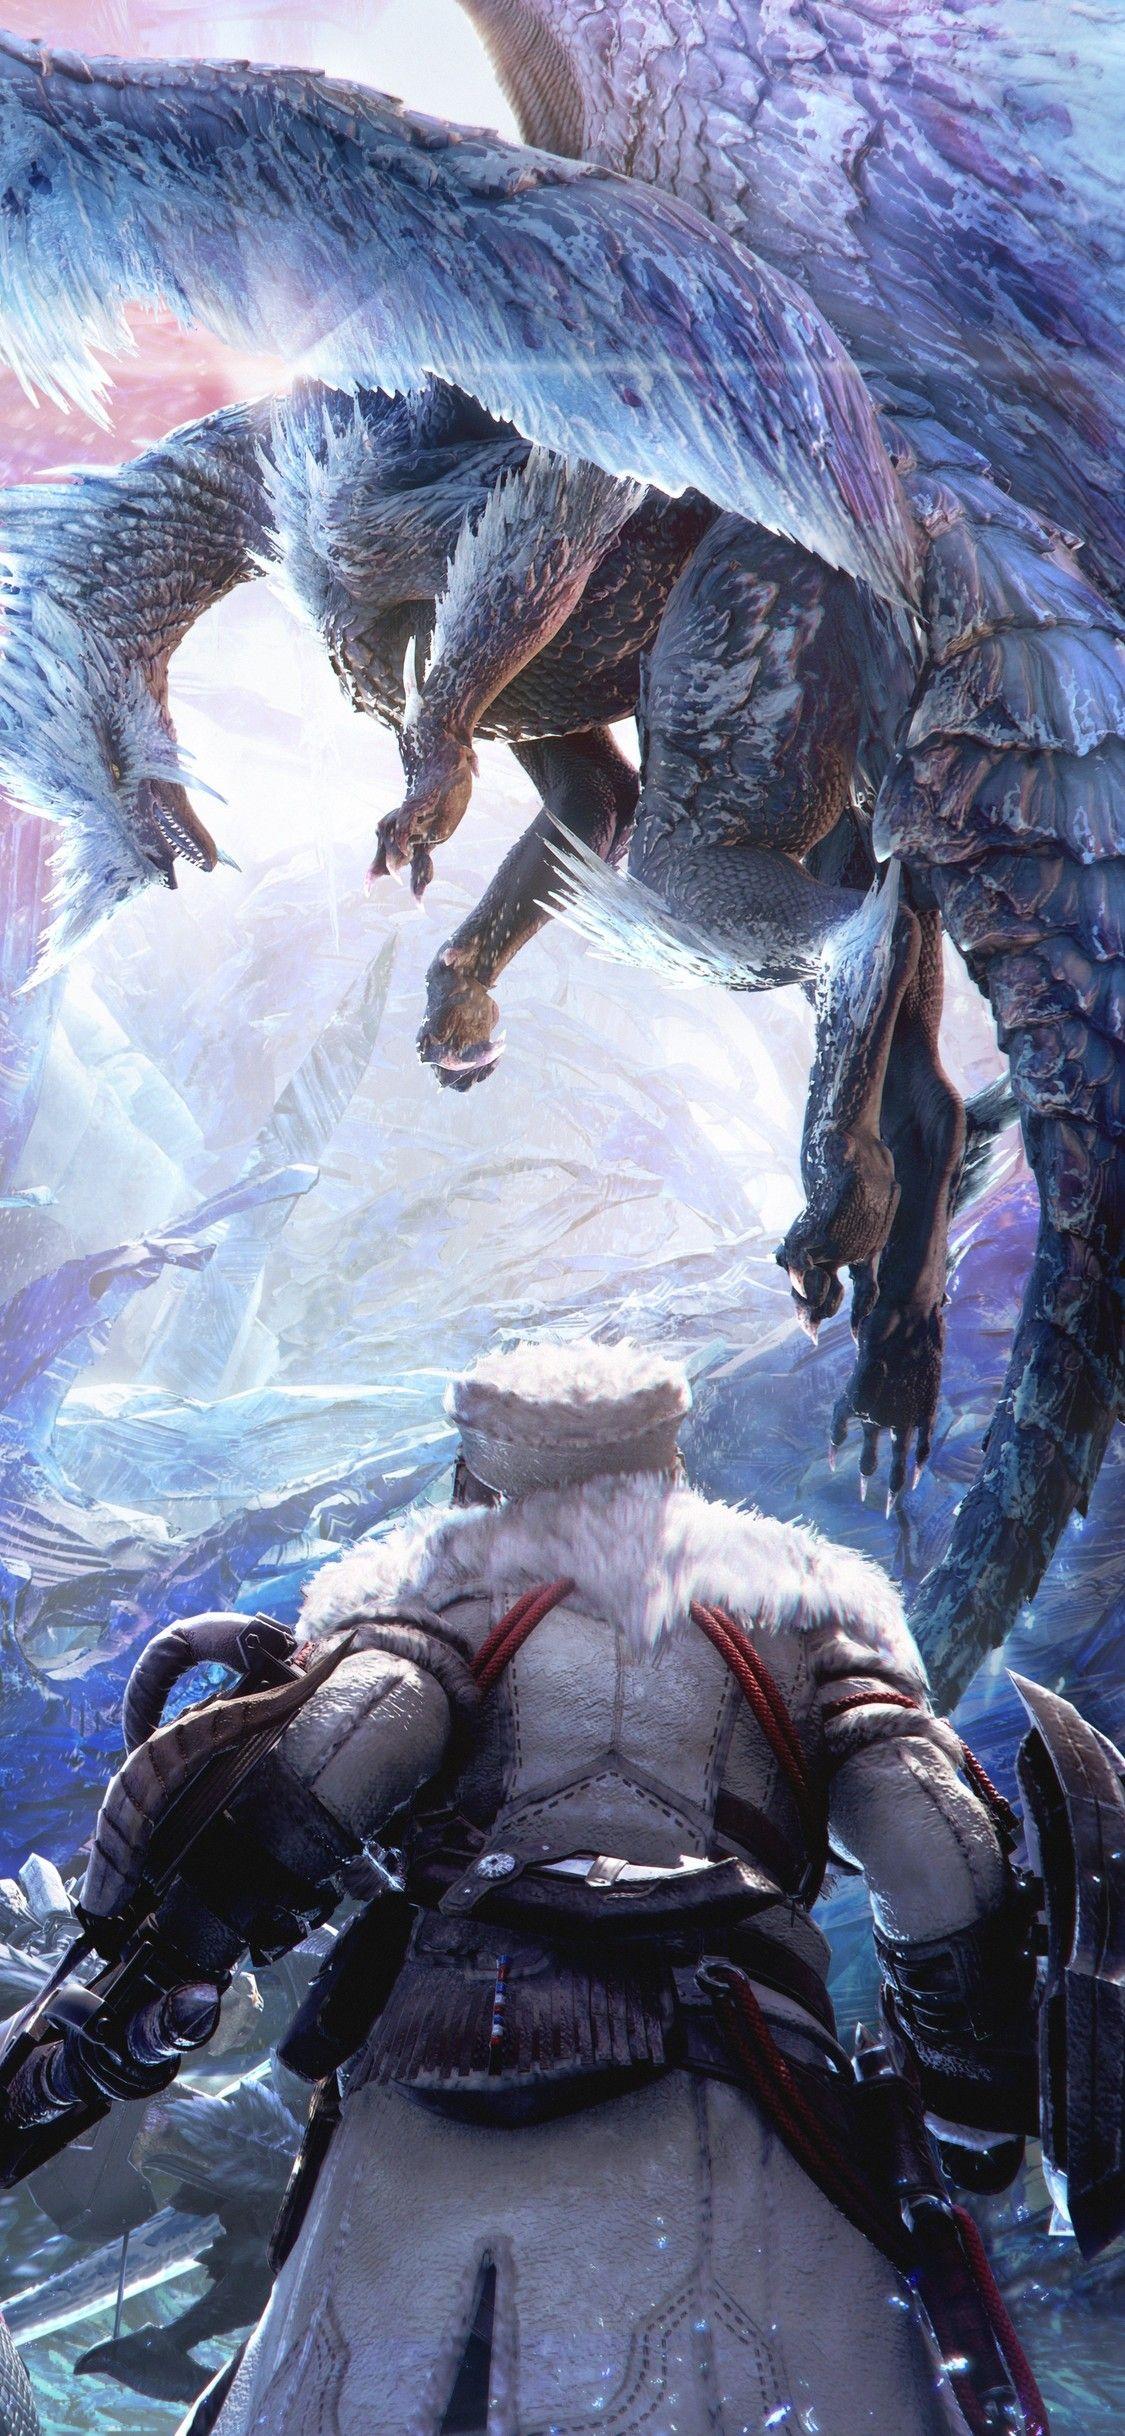 Monster Hunter Iphone Wallpapers Top Free Monster Hunter Iphone Backgrounds Wallpaperaccess